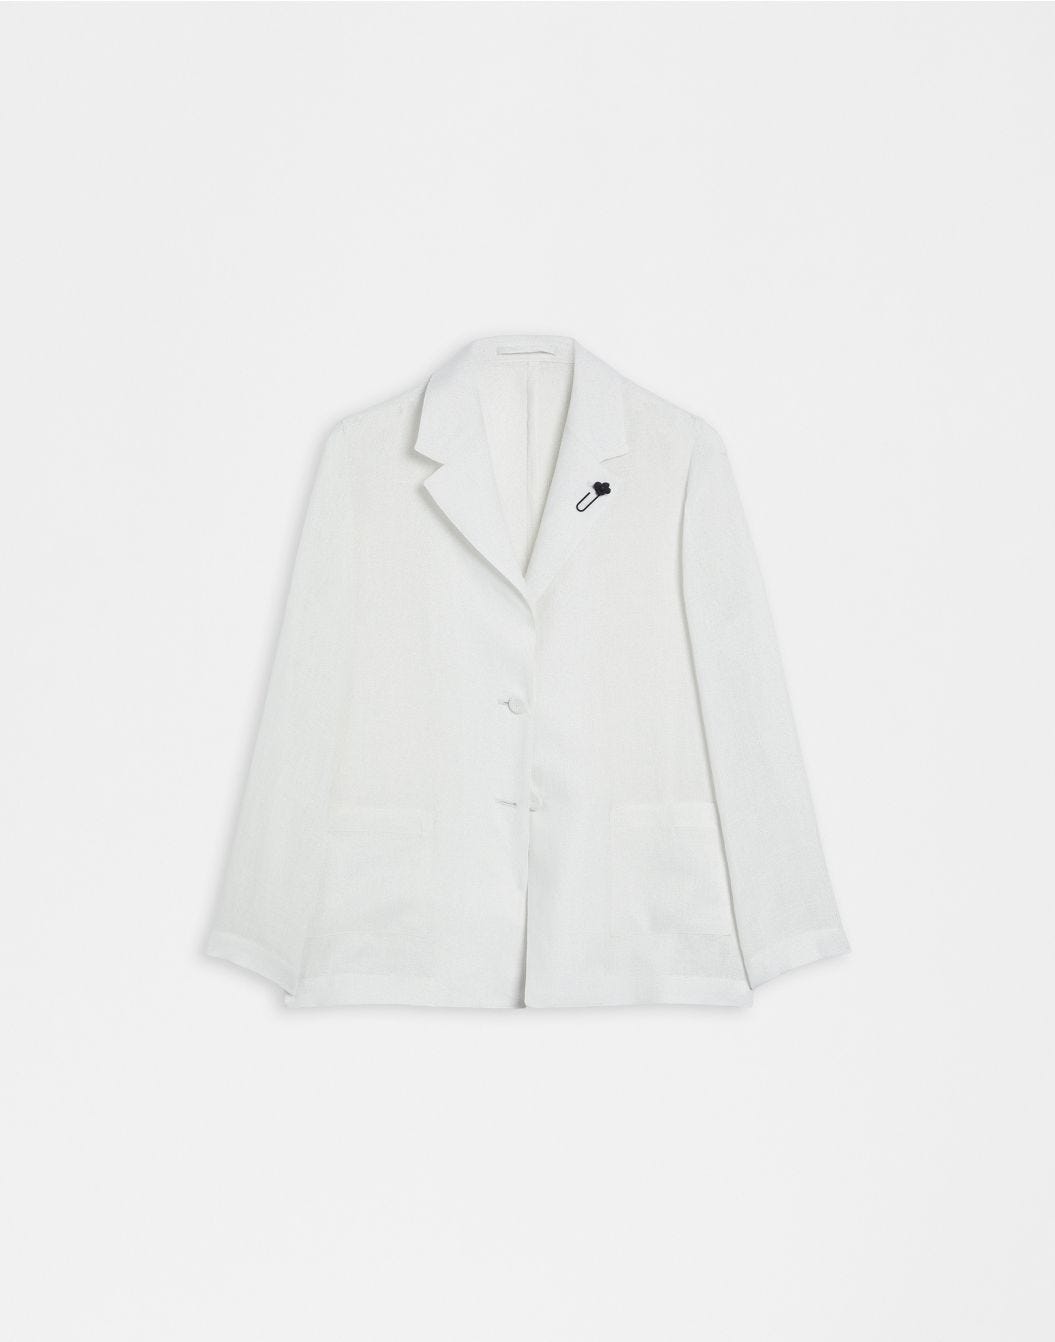 White and silver lurex linen single-breasted jacket